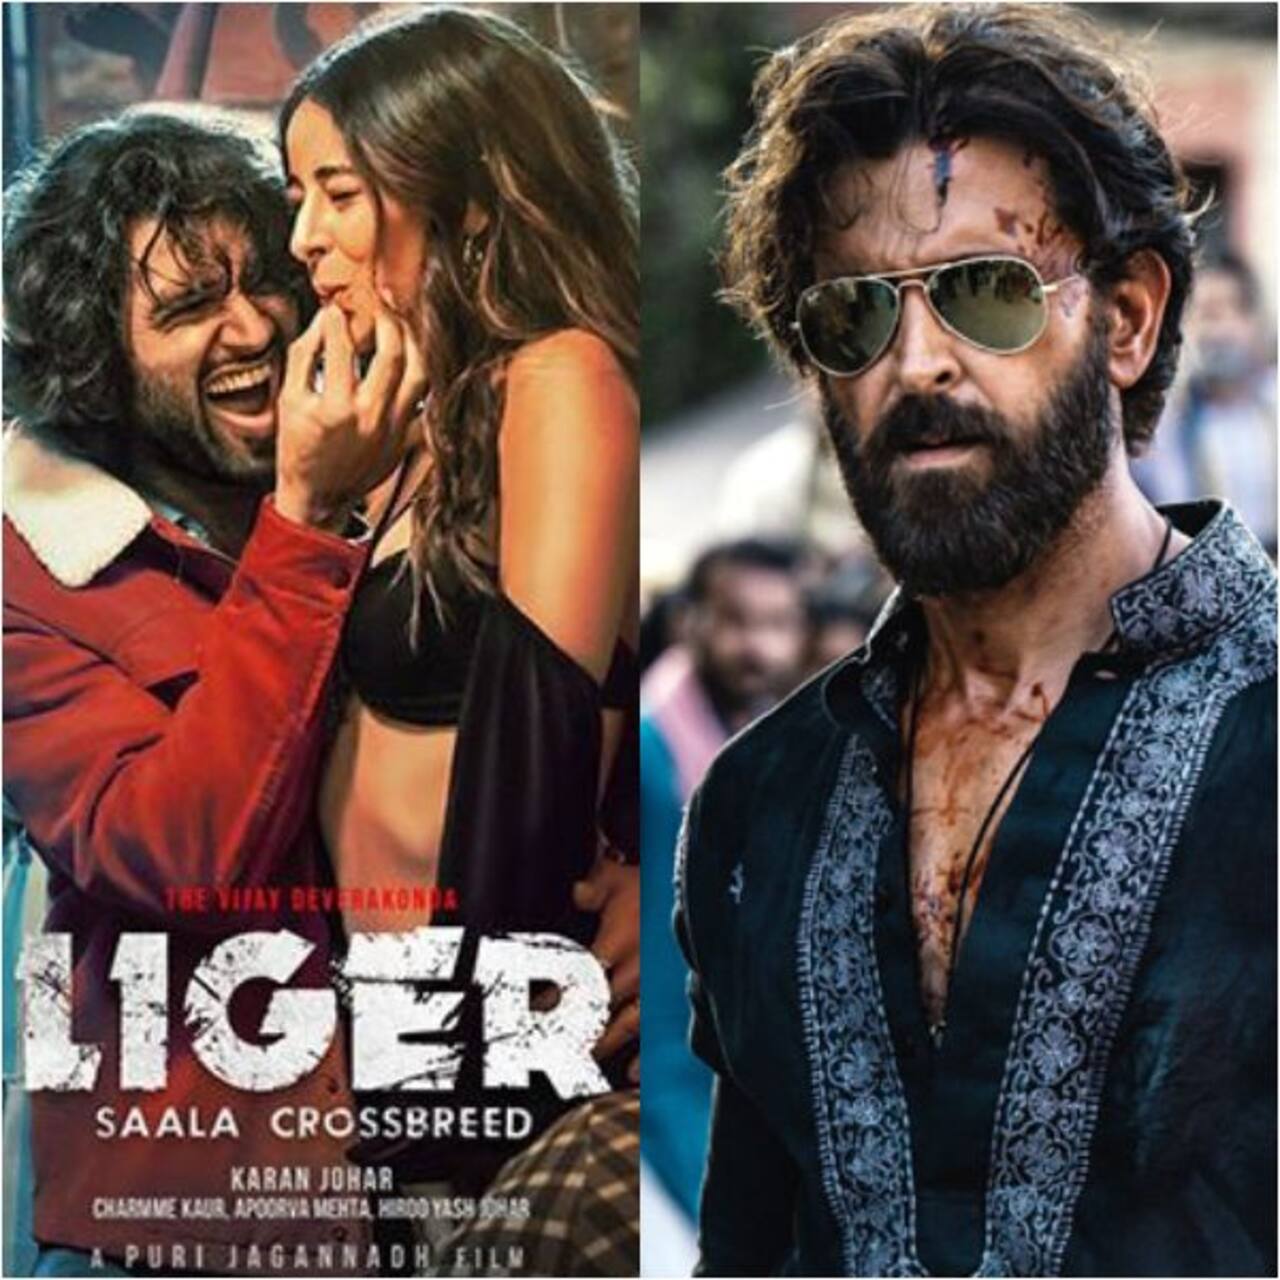 Liger, Vikram Vedha box office to get affected like Laal Singh Chaddha, Raksha Bandhan due to the Boycott Bollywood trend? Trade Experts Reveal [Exclusive]